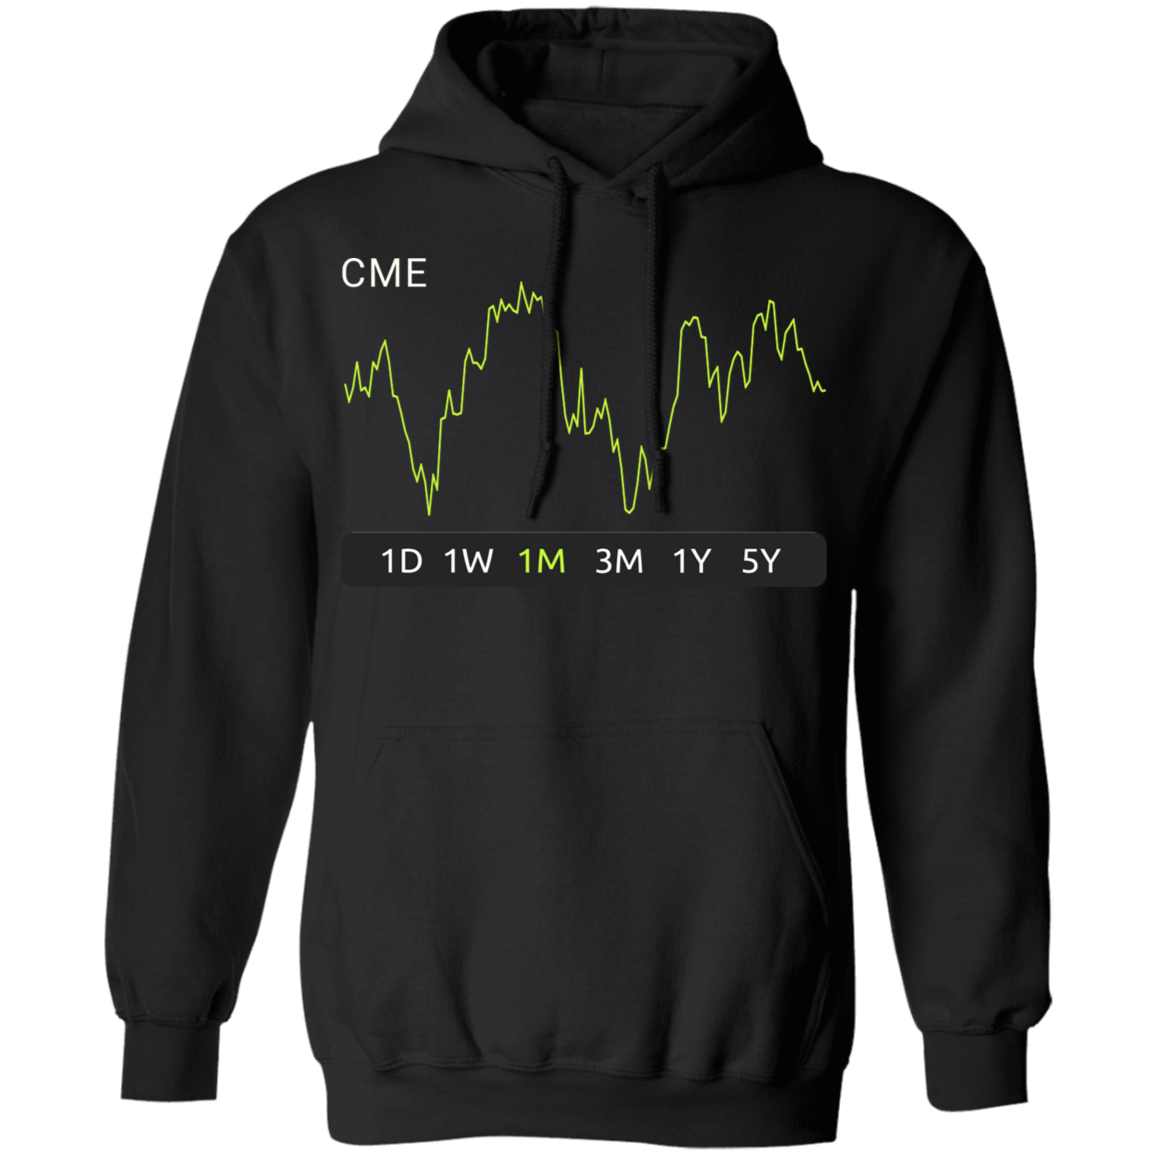 CME Stock 1m Pullover Hoodie